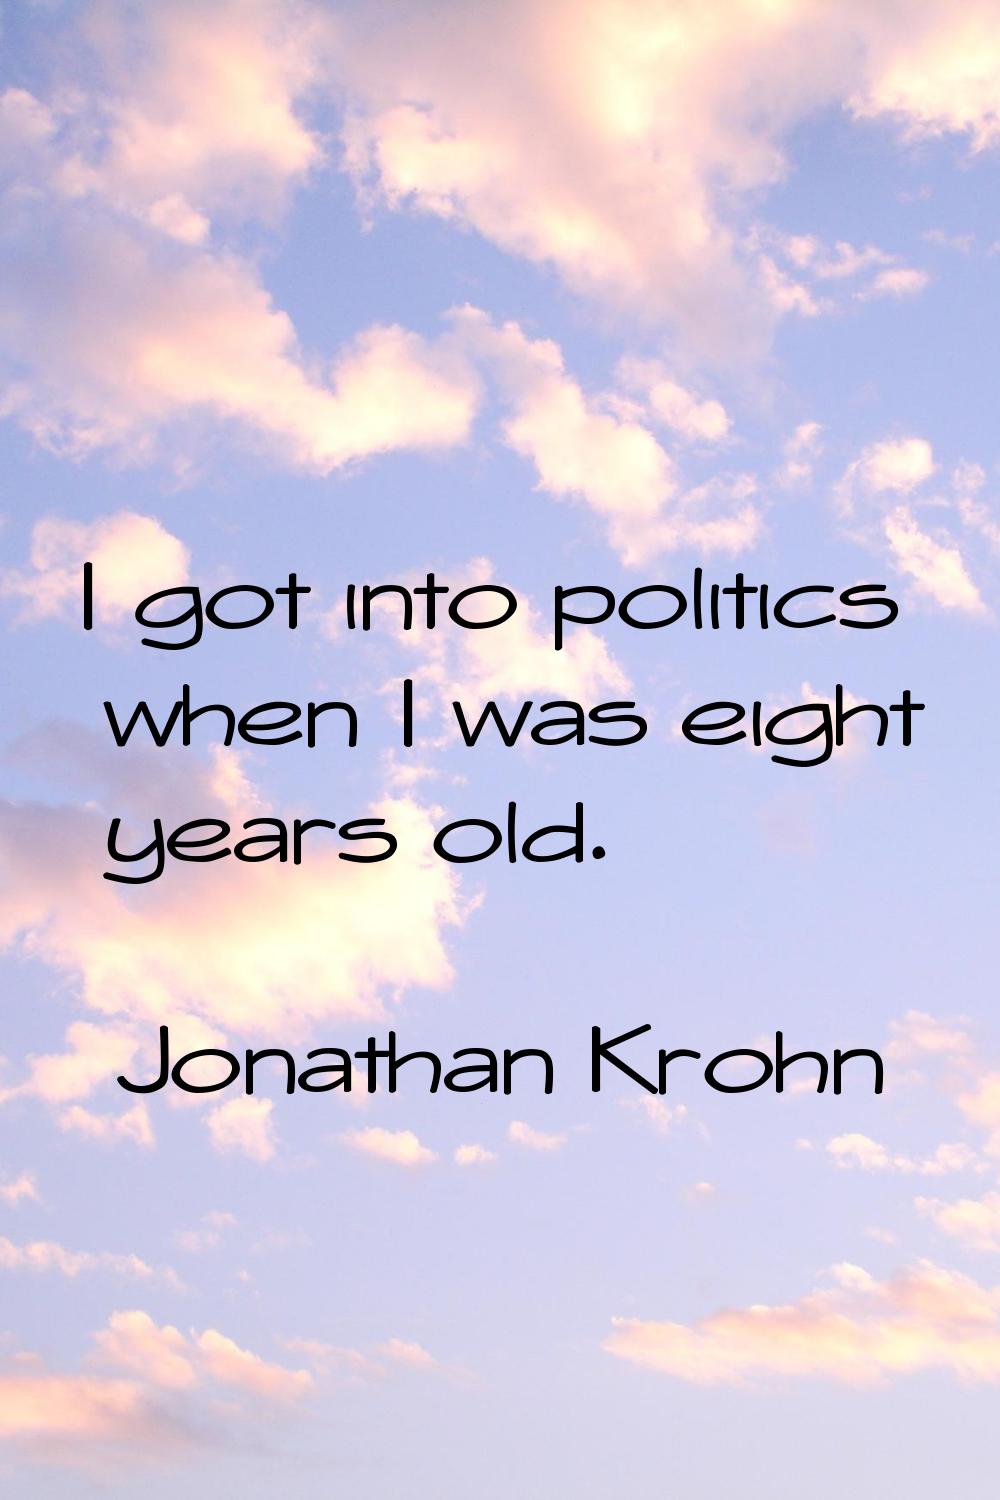 I got into politics when I was eight years old.